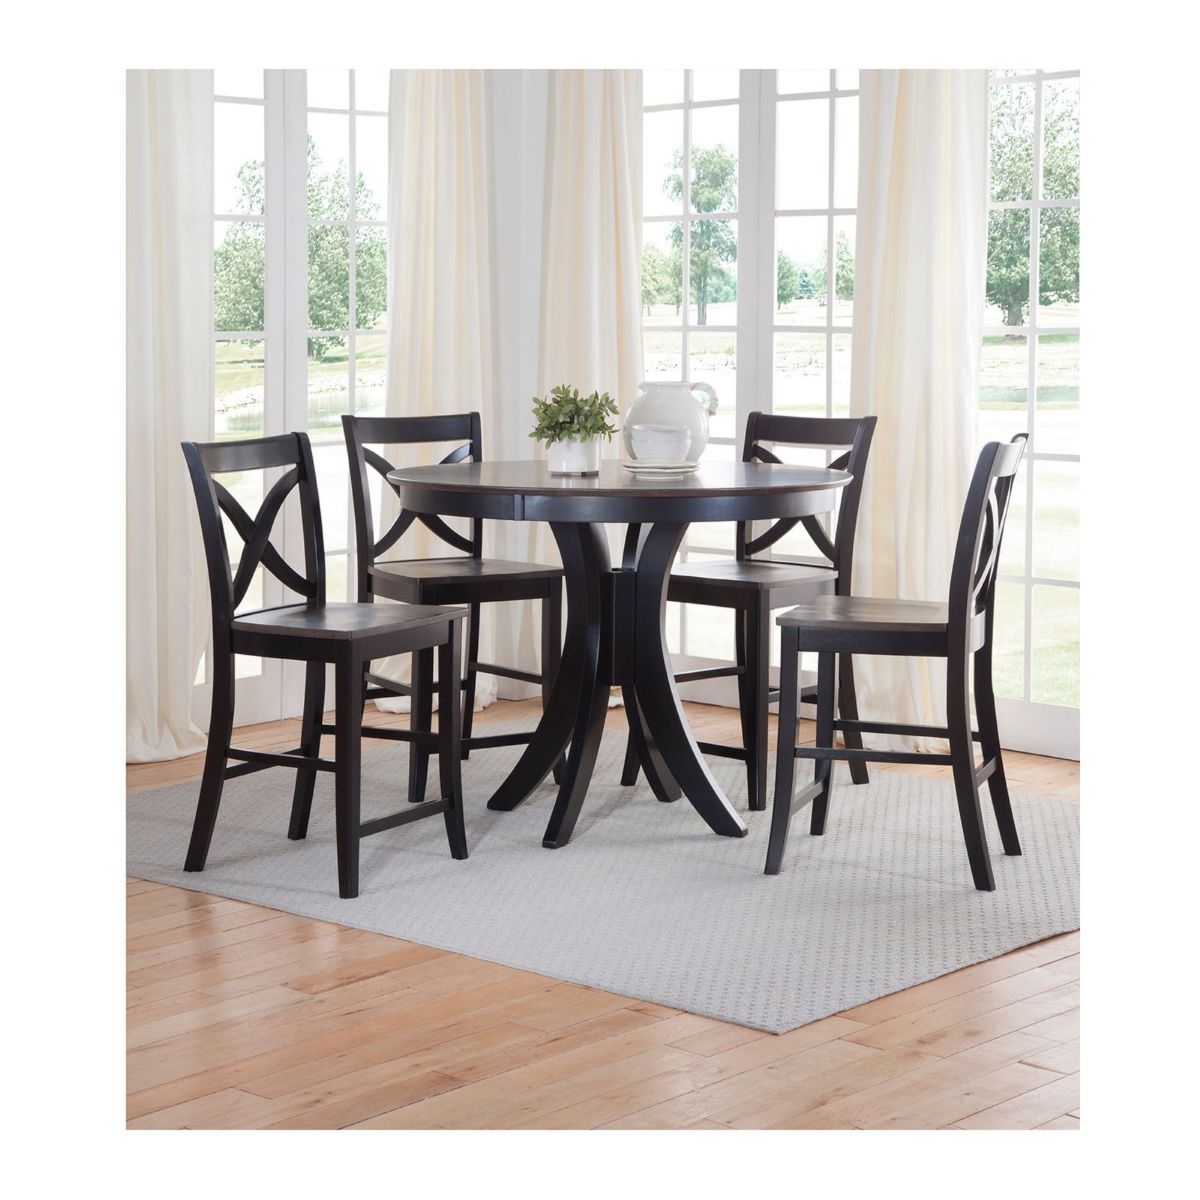 Picture of Siena Round Pedestal Dining Table